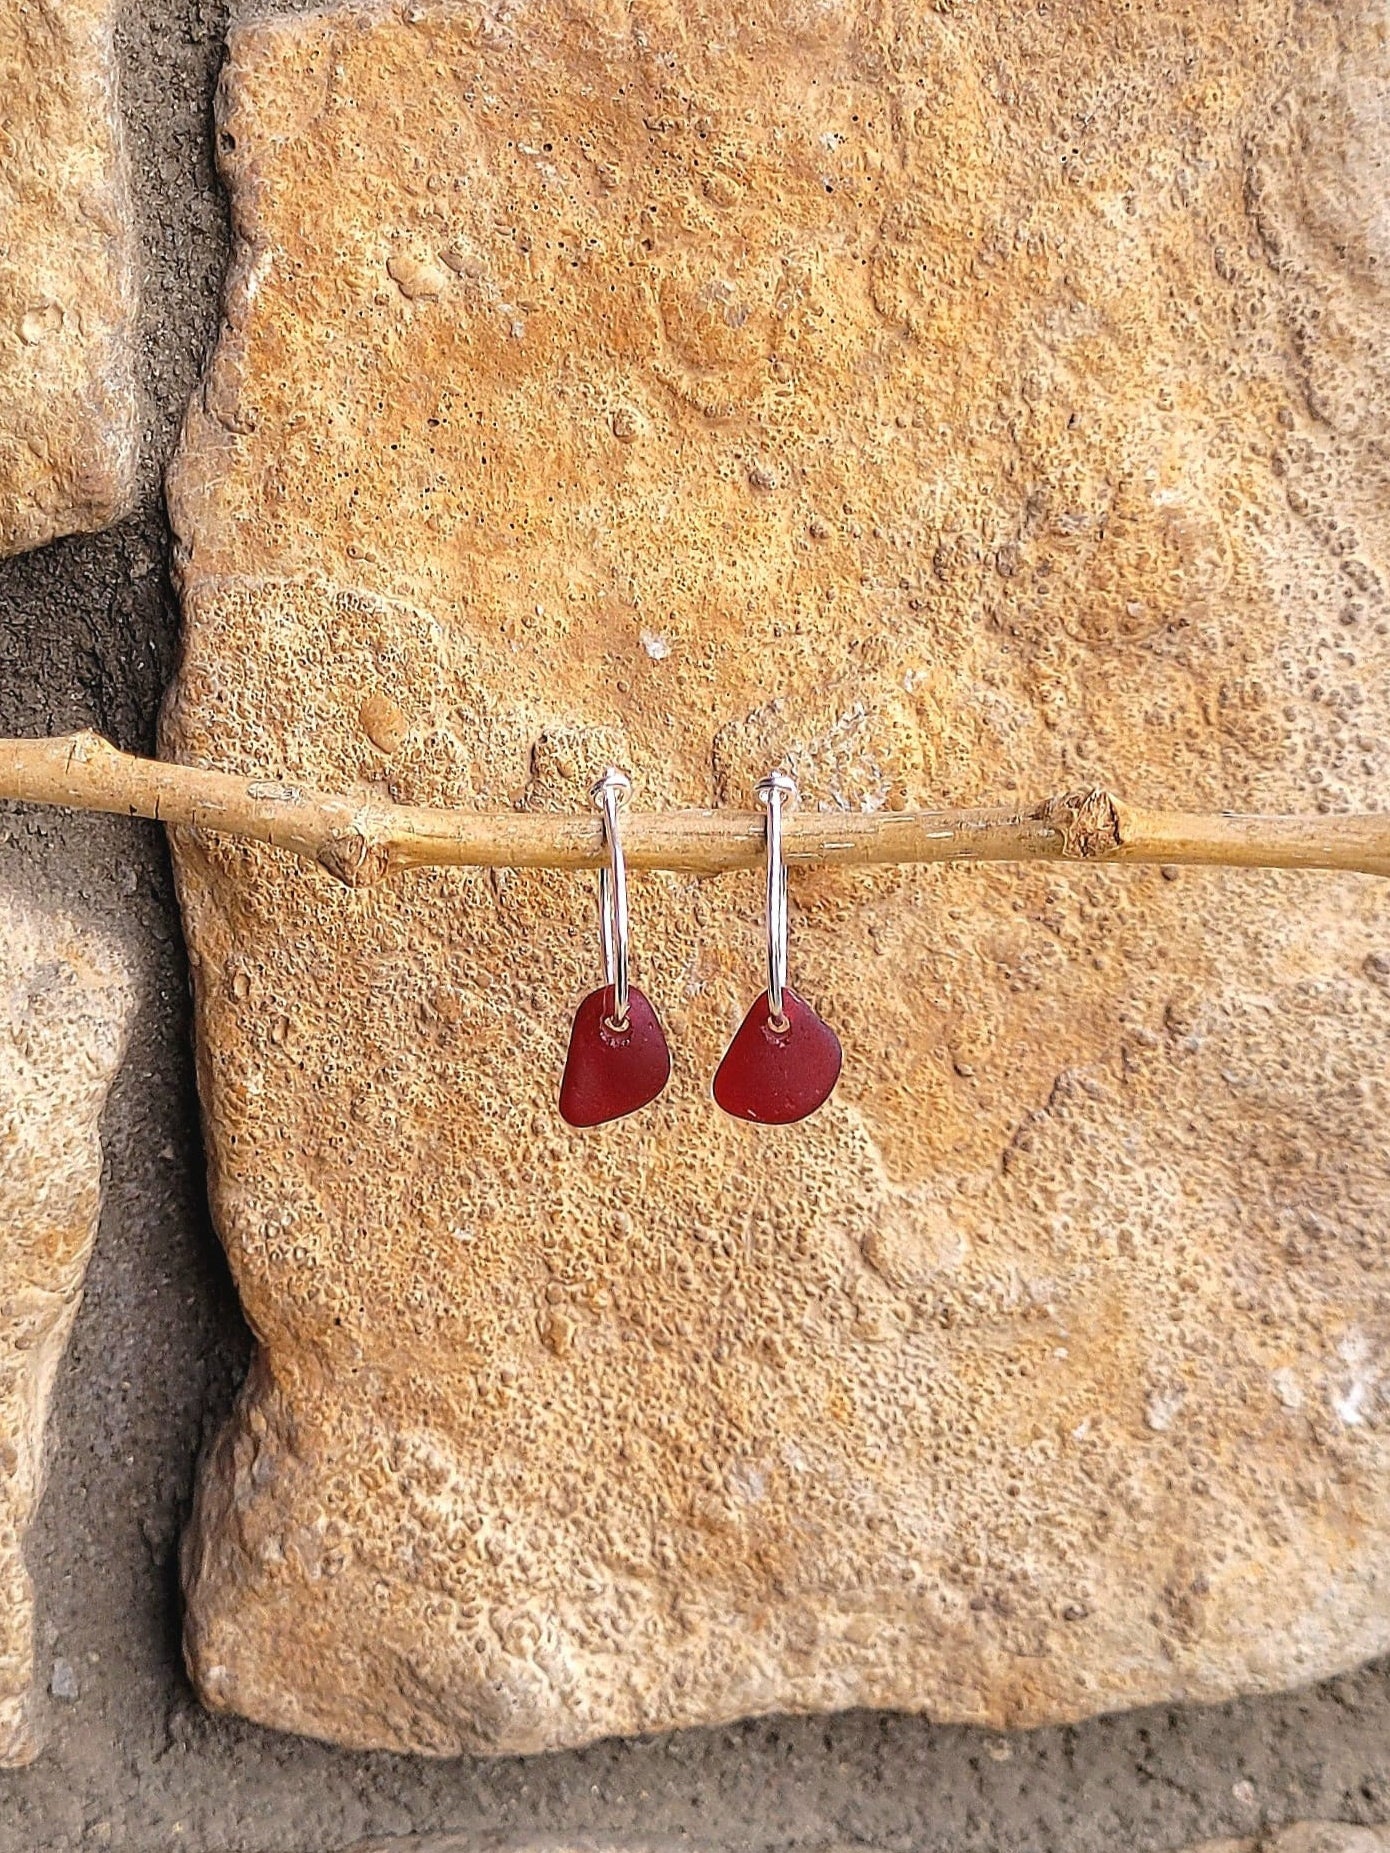 Red Sea Glass, Rare Red Seaglass Earrings Genuine Sea Glass Jewelry,  Earrings Sterling Silver, French Hooks, Beach Glass - Etsy